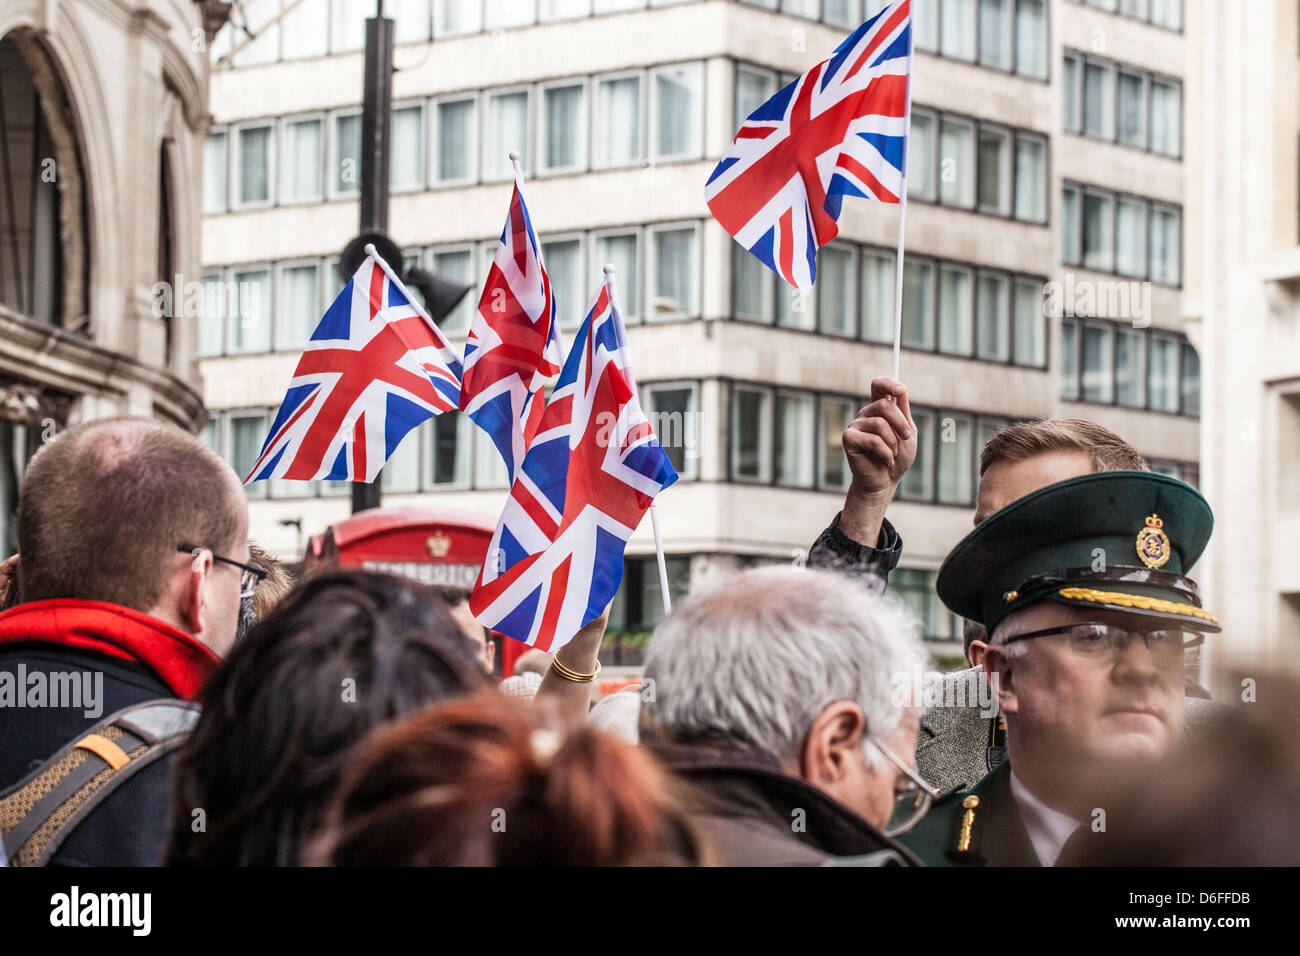 Supporters holding Union Jack flags at the funeral of Lady Thatcher, London, England, UK. Stock Photo